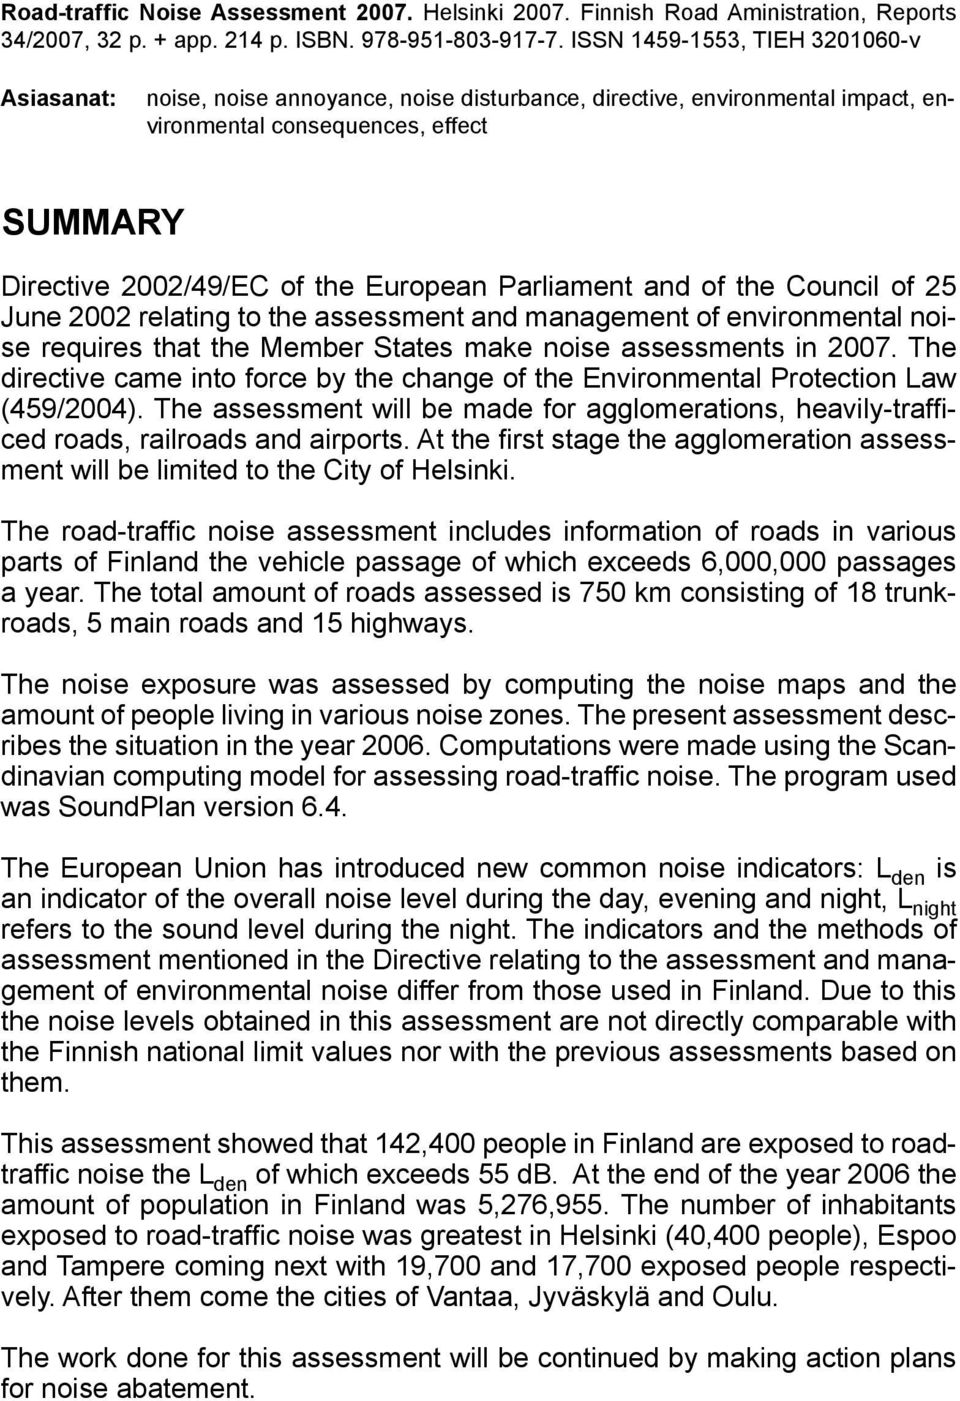 Parliament and of the Council of 25 June 2002 relating to the assessment and management of environmental noise requires that the Member States make noise assessments in 2007.